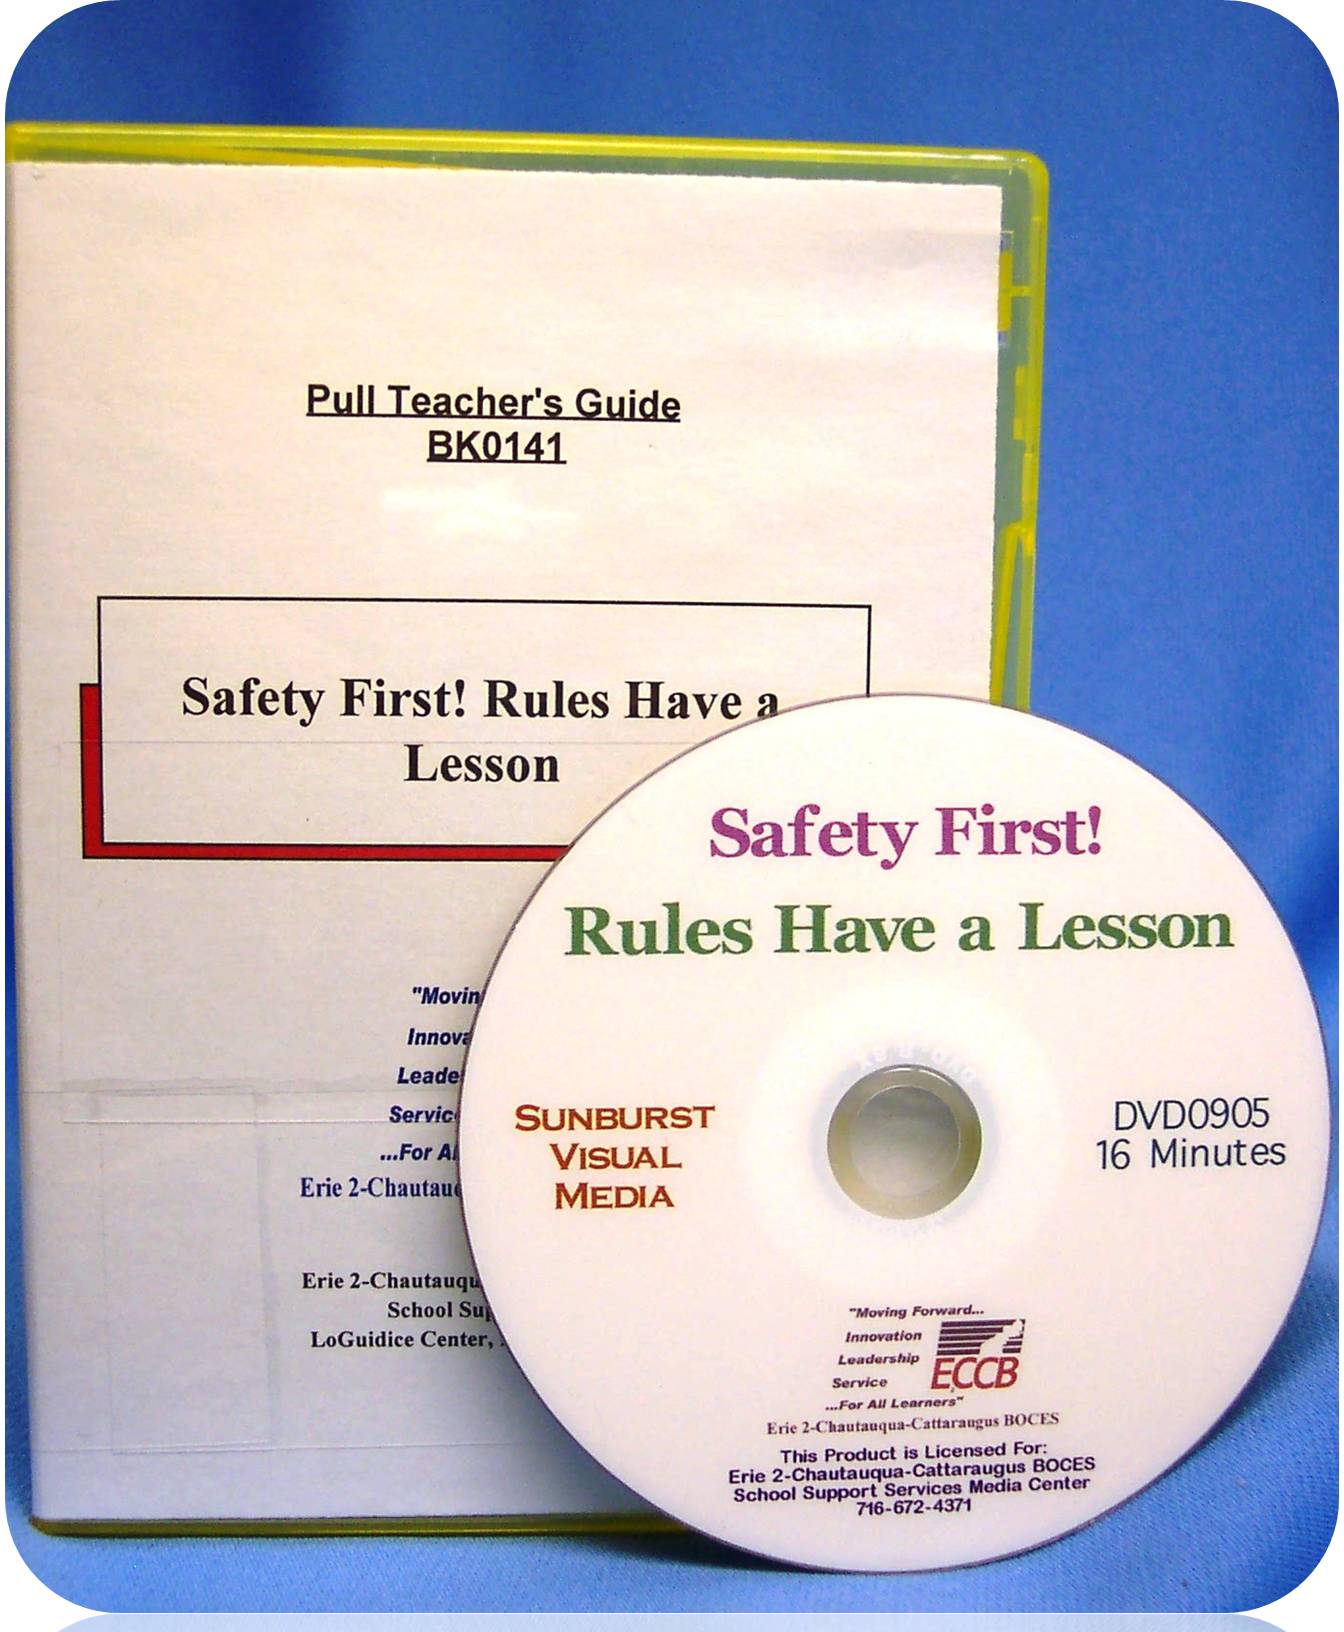 Safety First! Rules Have a Lesson